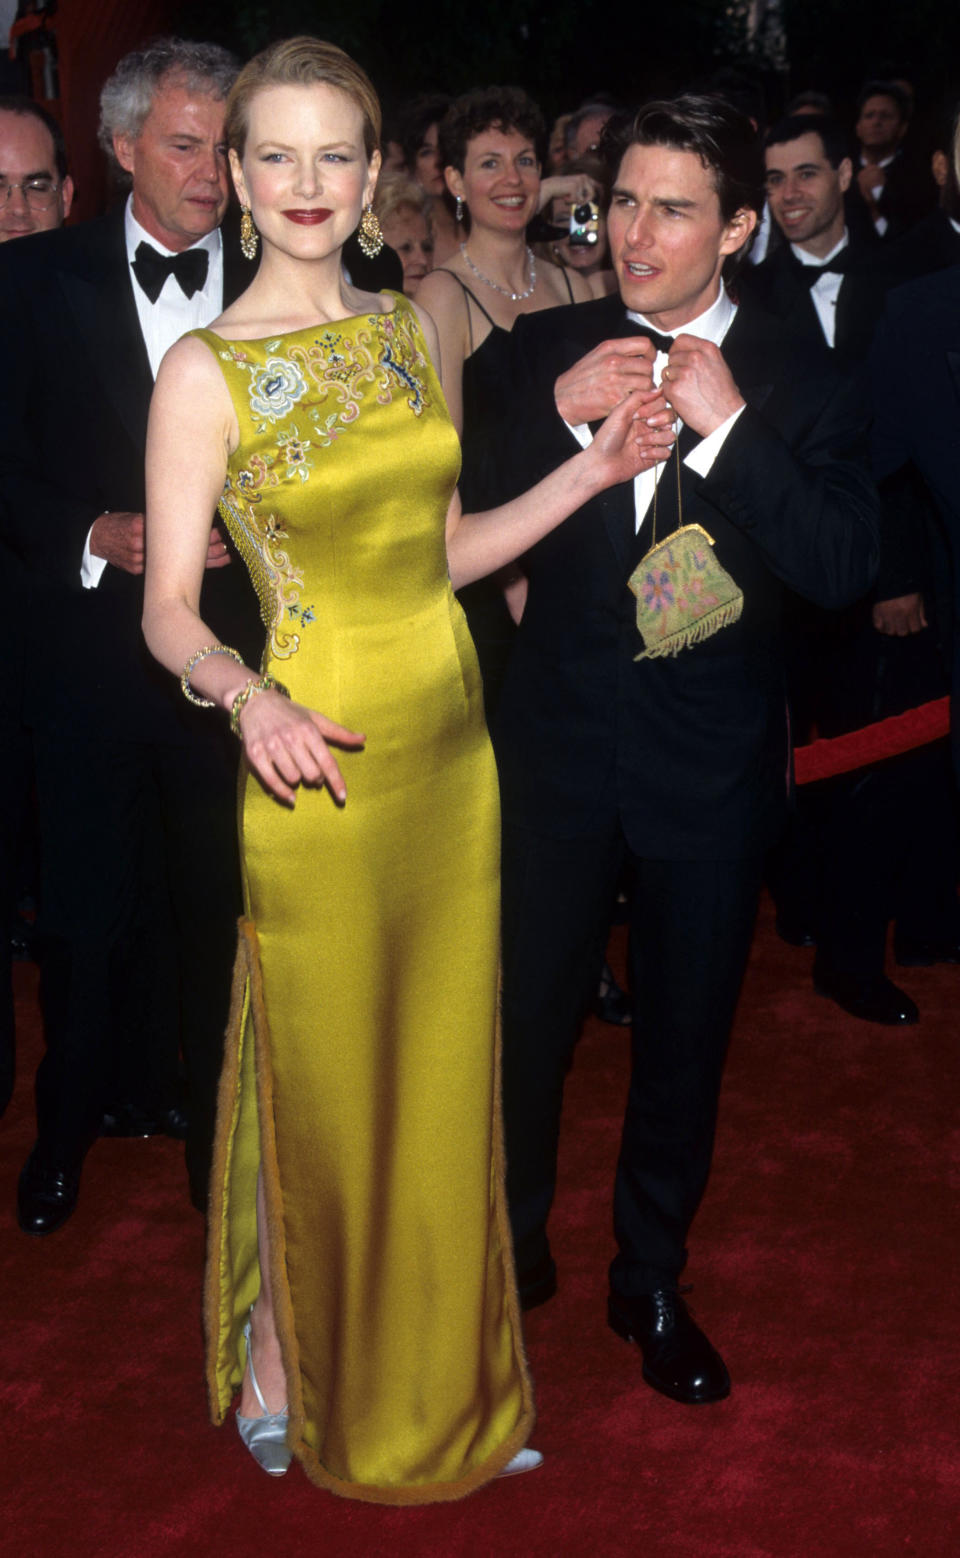 Nicole Kidman stands on a red carpet in a green/yellow floor-length dress, she's handing her bag to Tom Cruise who stands behind her in a tux